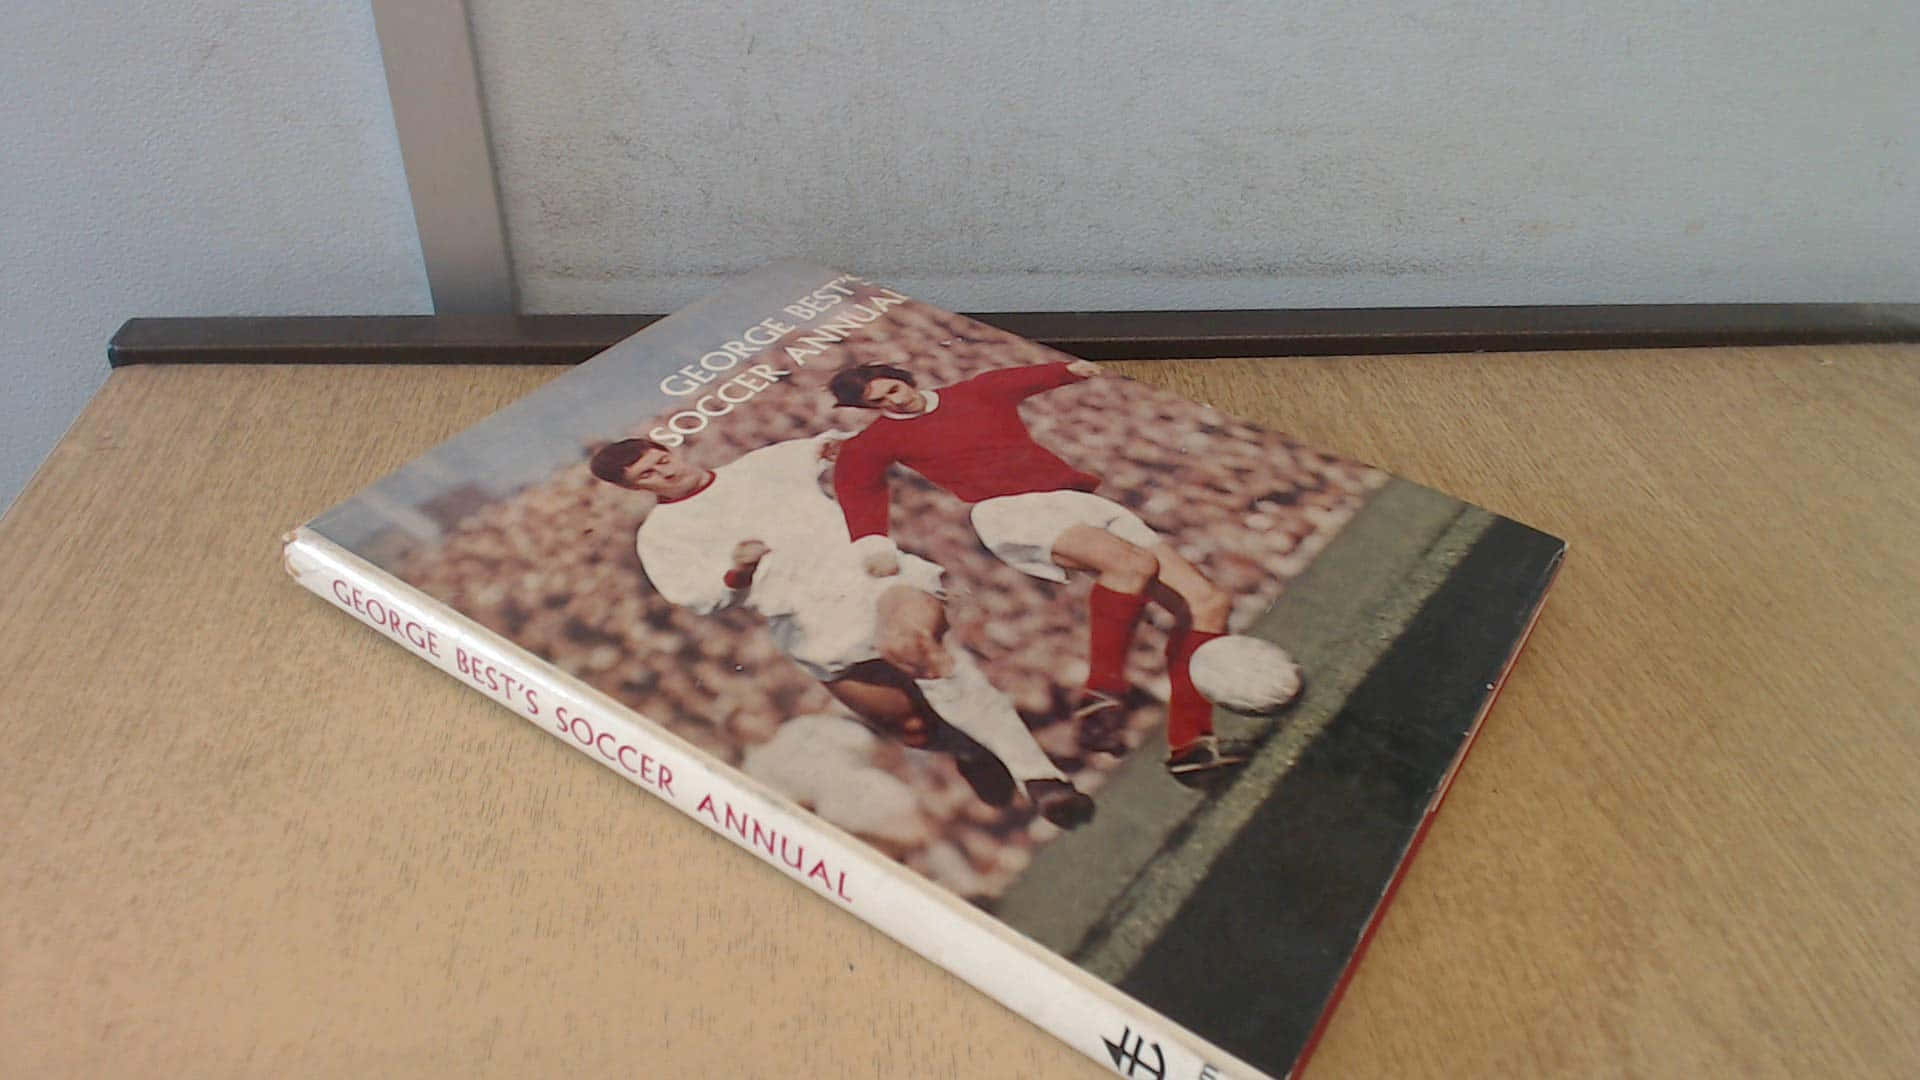 George Best Soccer Annual Book On Table Background